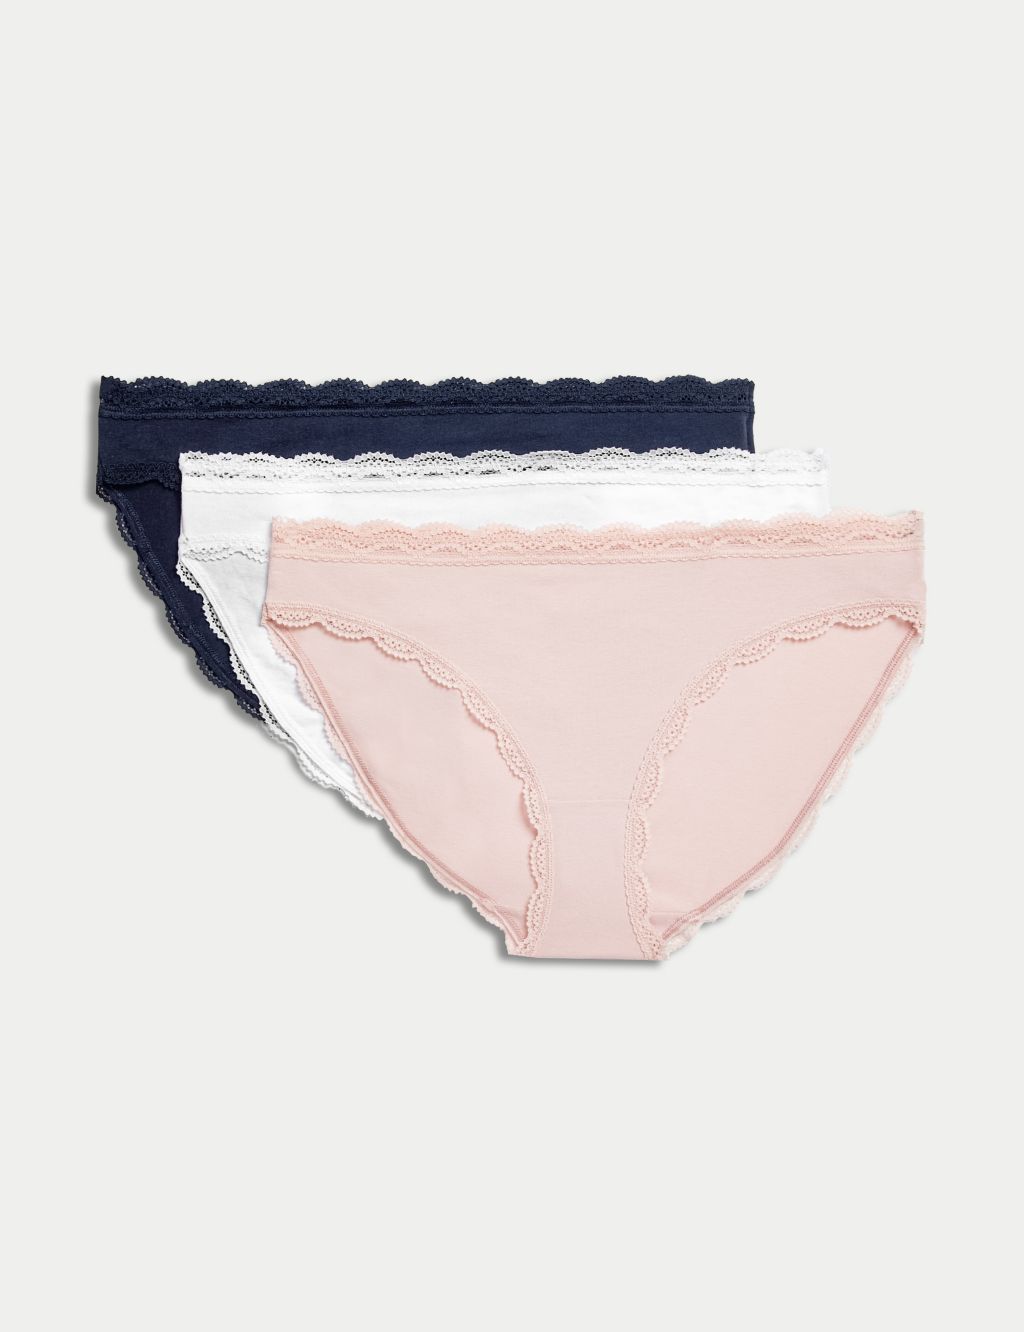 Essentials Women's Ribbed Bikini Underwear, Pack of 4, Black/Pale  Pink/Bright White, XX-Small : Clothing, Shoes & Jewelry 